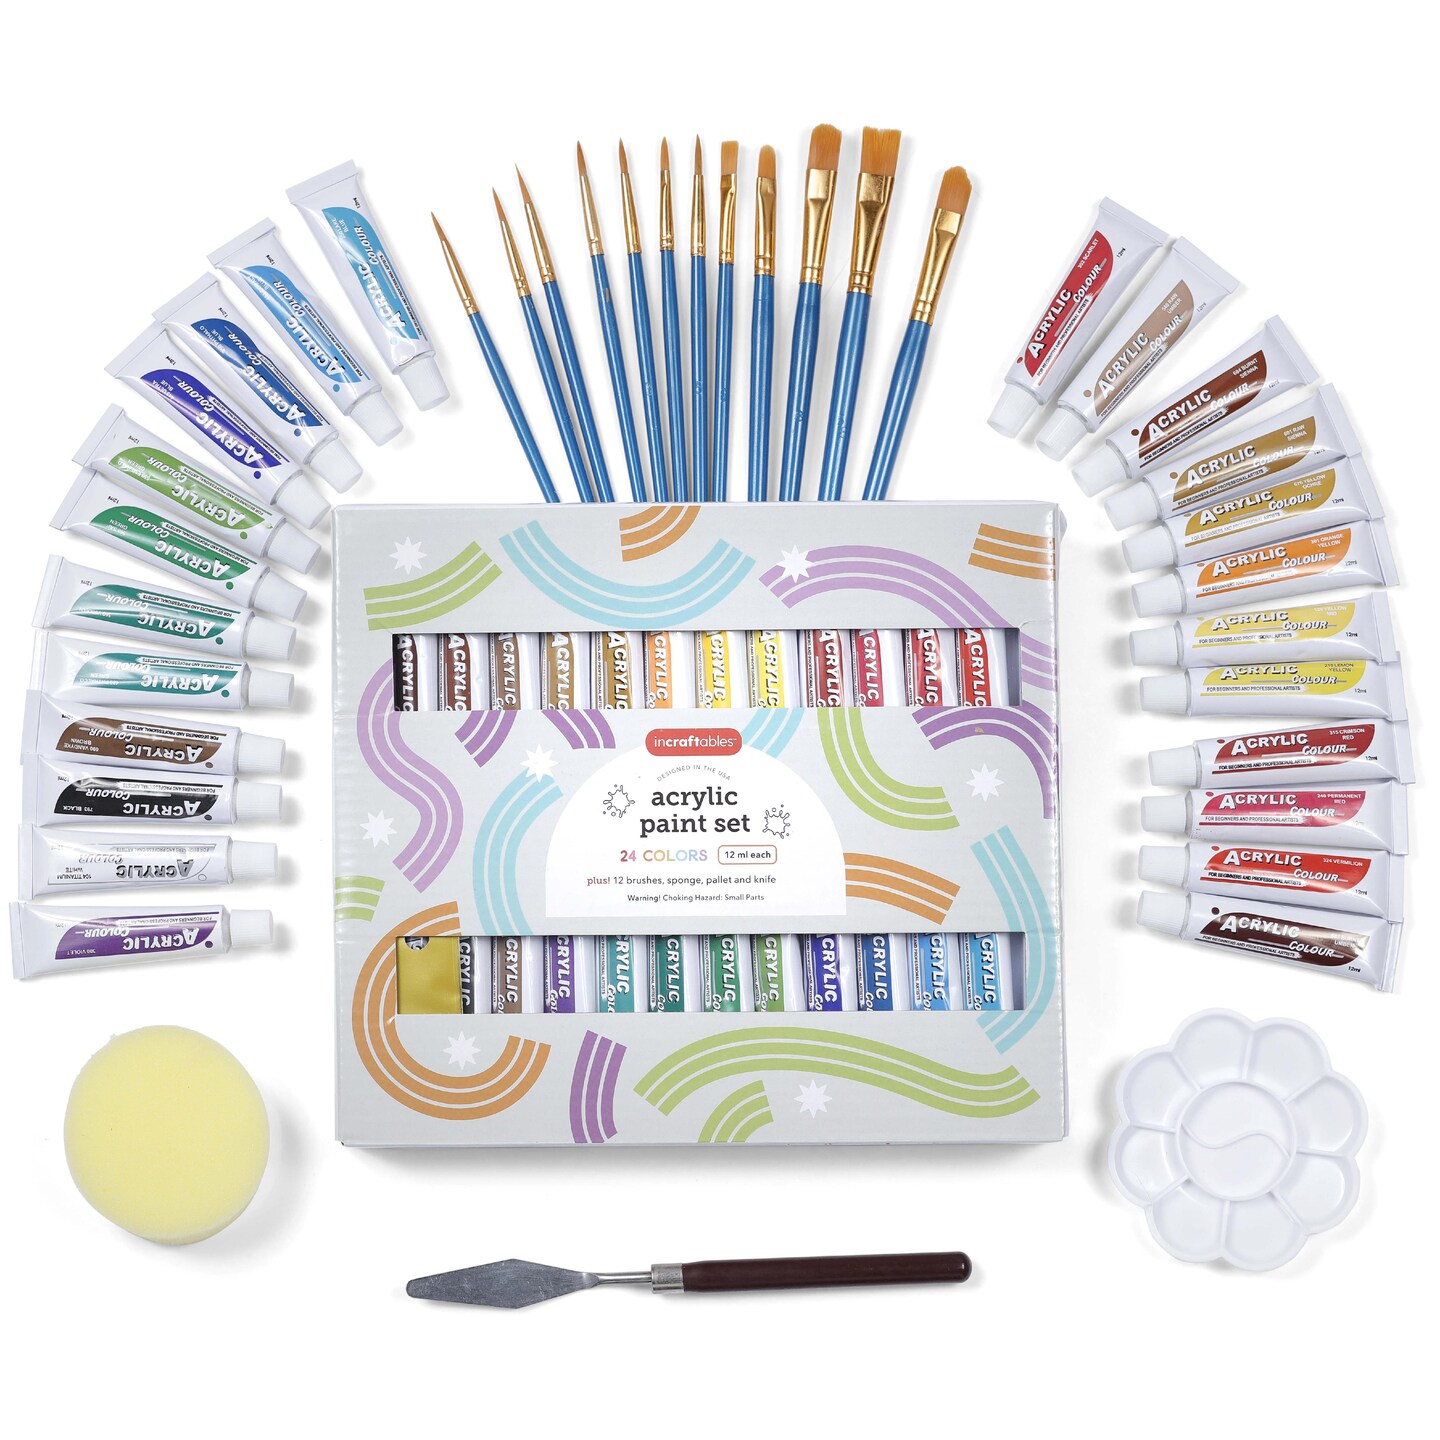 Incraftables Acrylic Paint Set for Adults &#x26; Kids. 24 Colors Acrylic Paints for Canvas Painting with 12 Brushes, Sponge, Pallet &#x26; Craft Knife. Non-Toxic Art Paint Set for Ceramic, Wood, Fabric &#x26; Paper